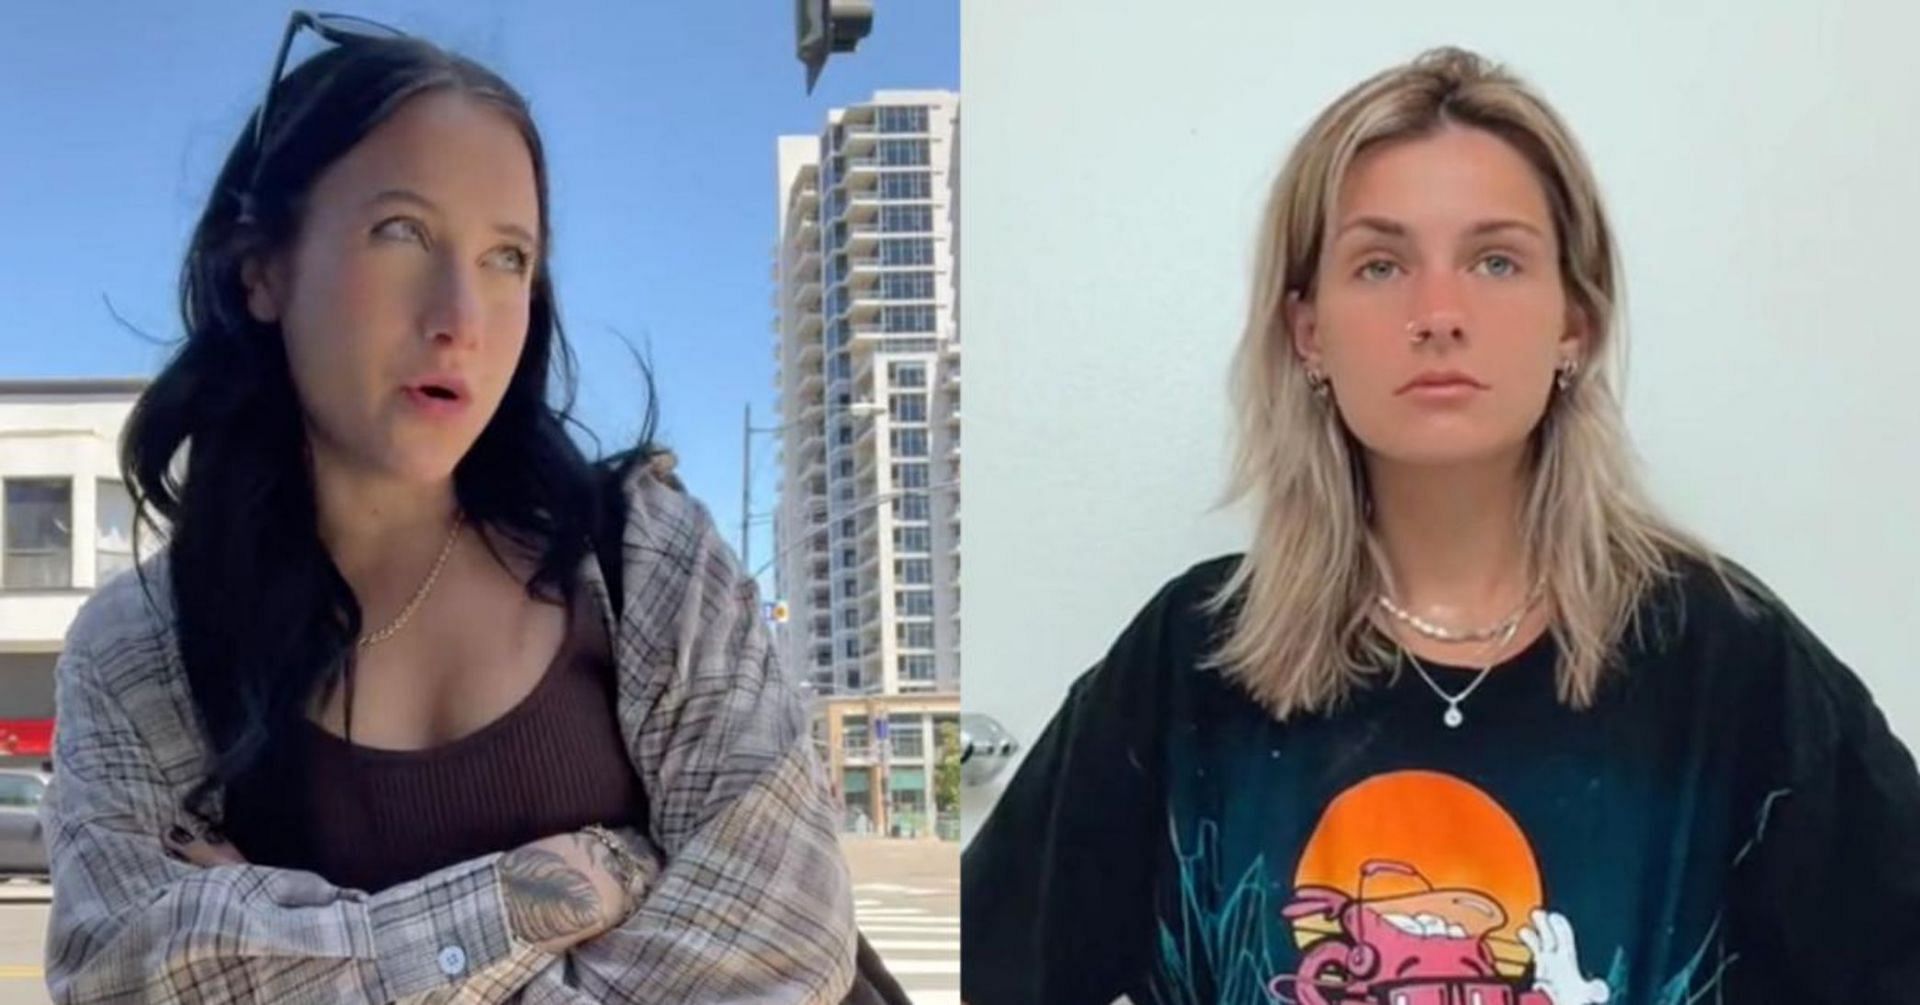 Talyn and Tish have denied the s*xual assault allegations (Image via Images via @hotbishtish1 and @talynntalks/TikTok)